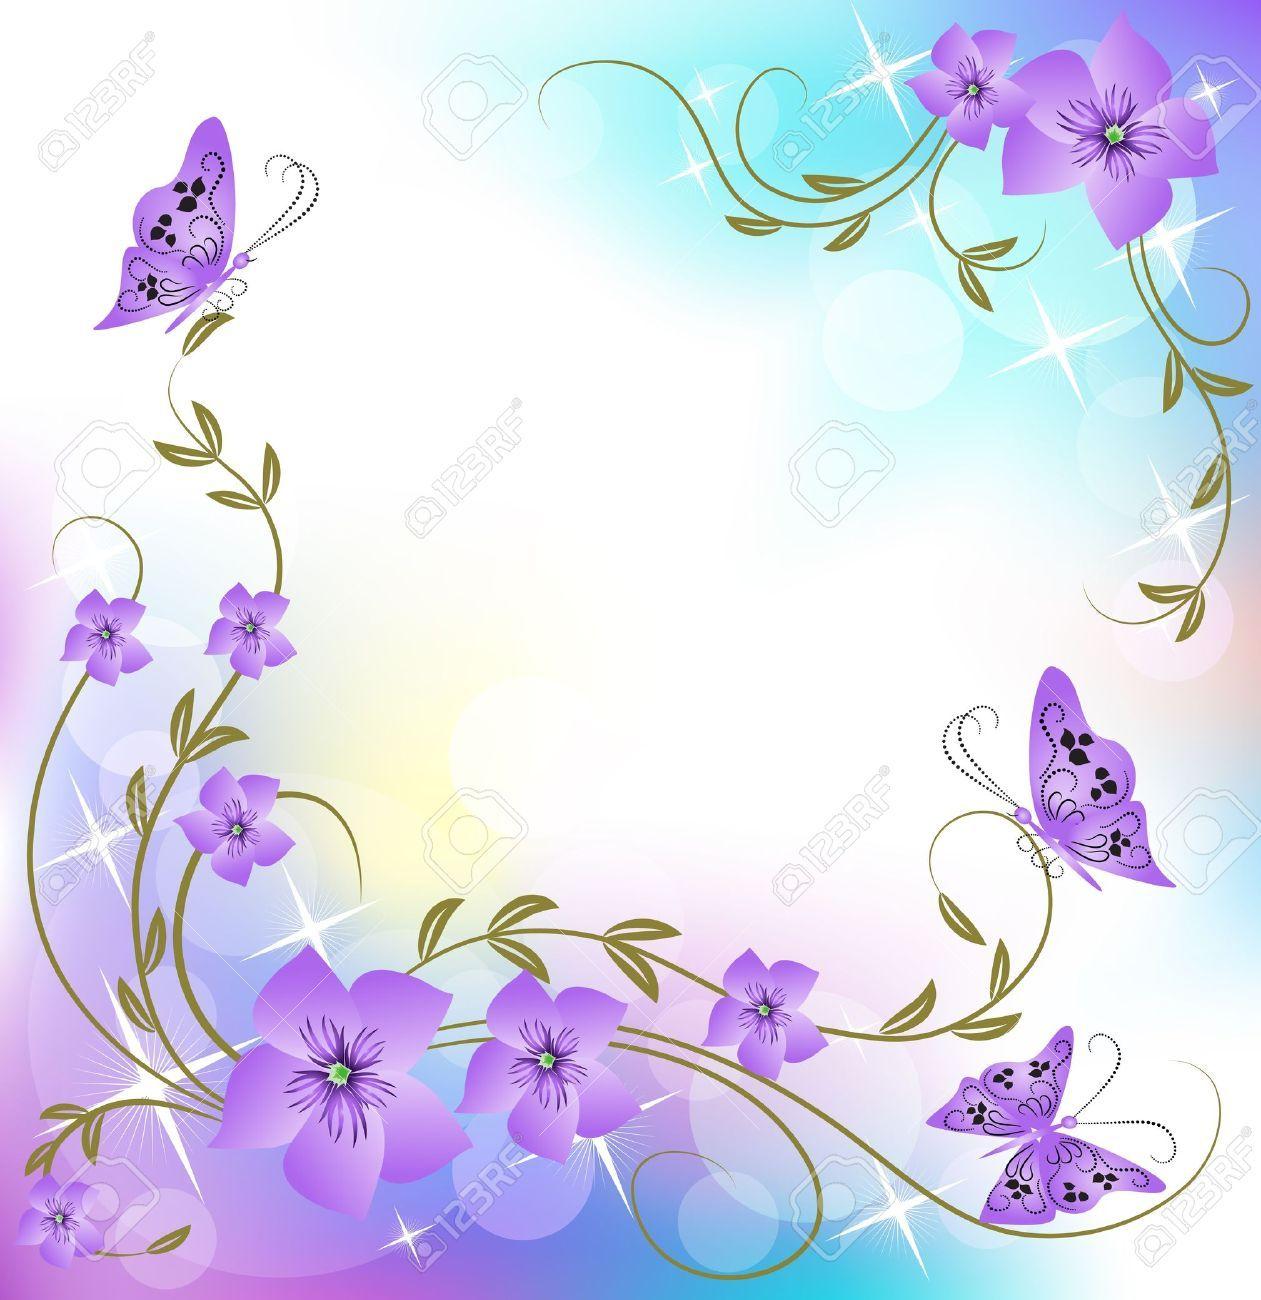 Purple Flower clipart butterfly background and in color